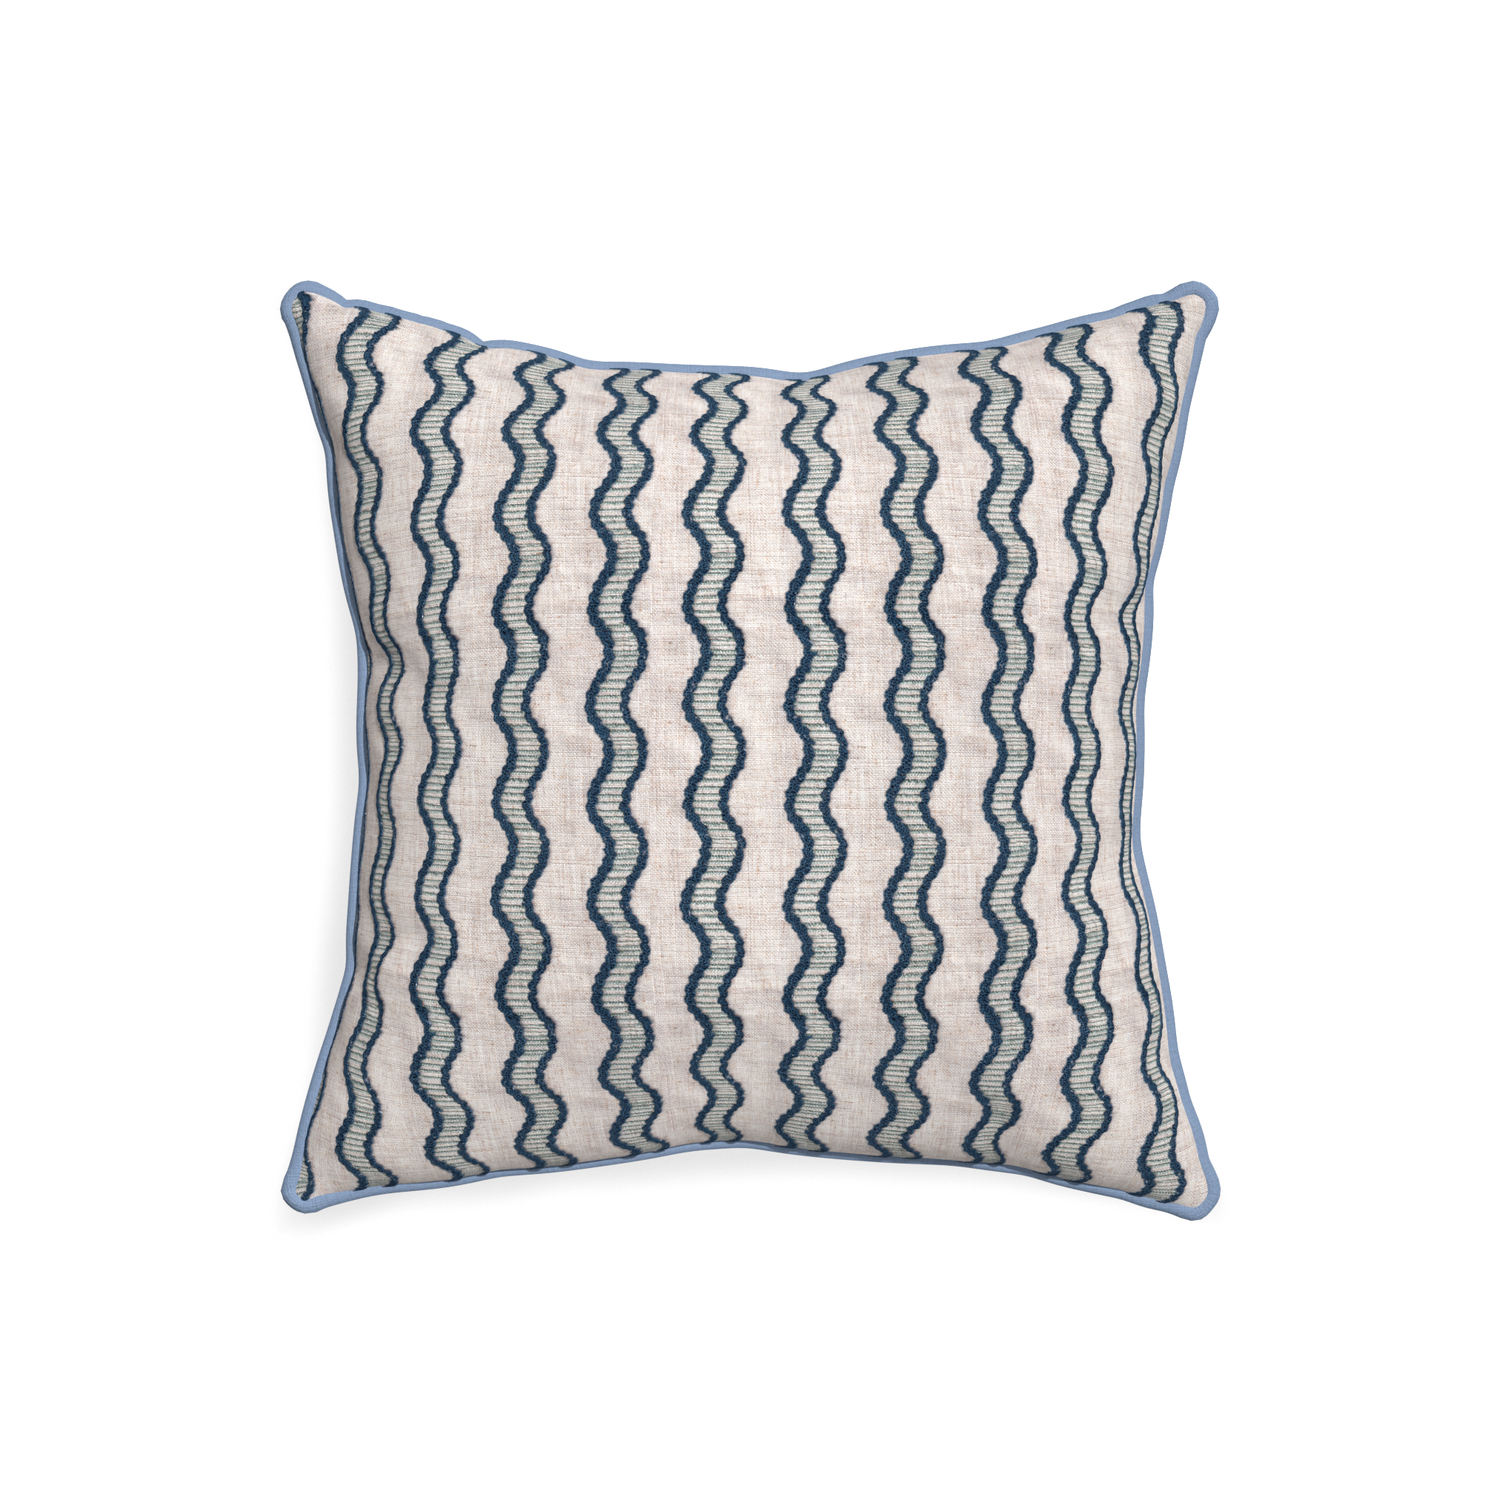 20-square beatrice custom embroidered wavepillow with sky piping on white background